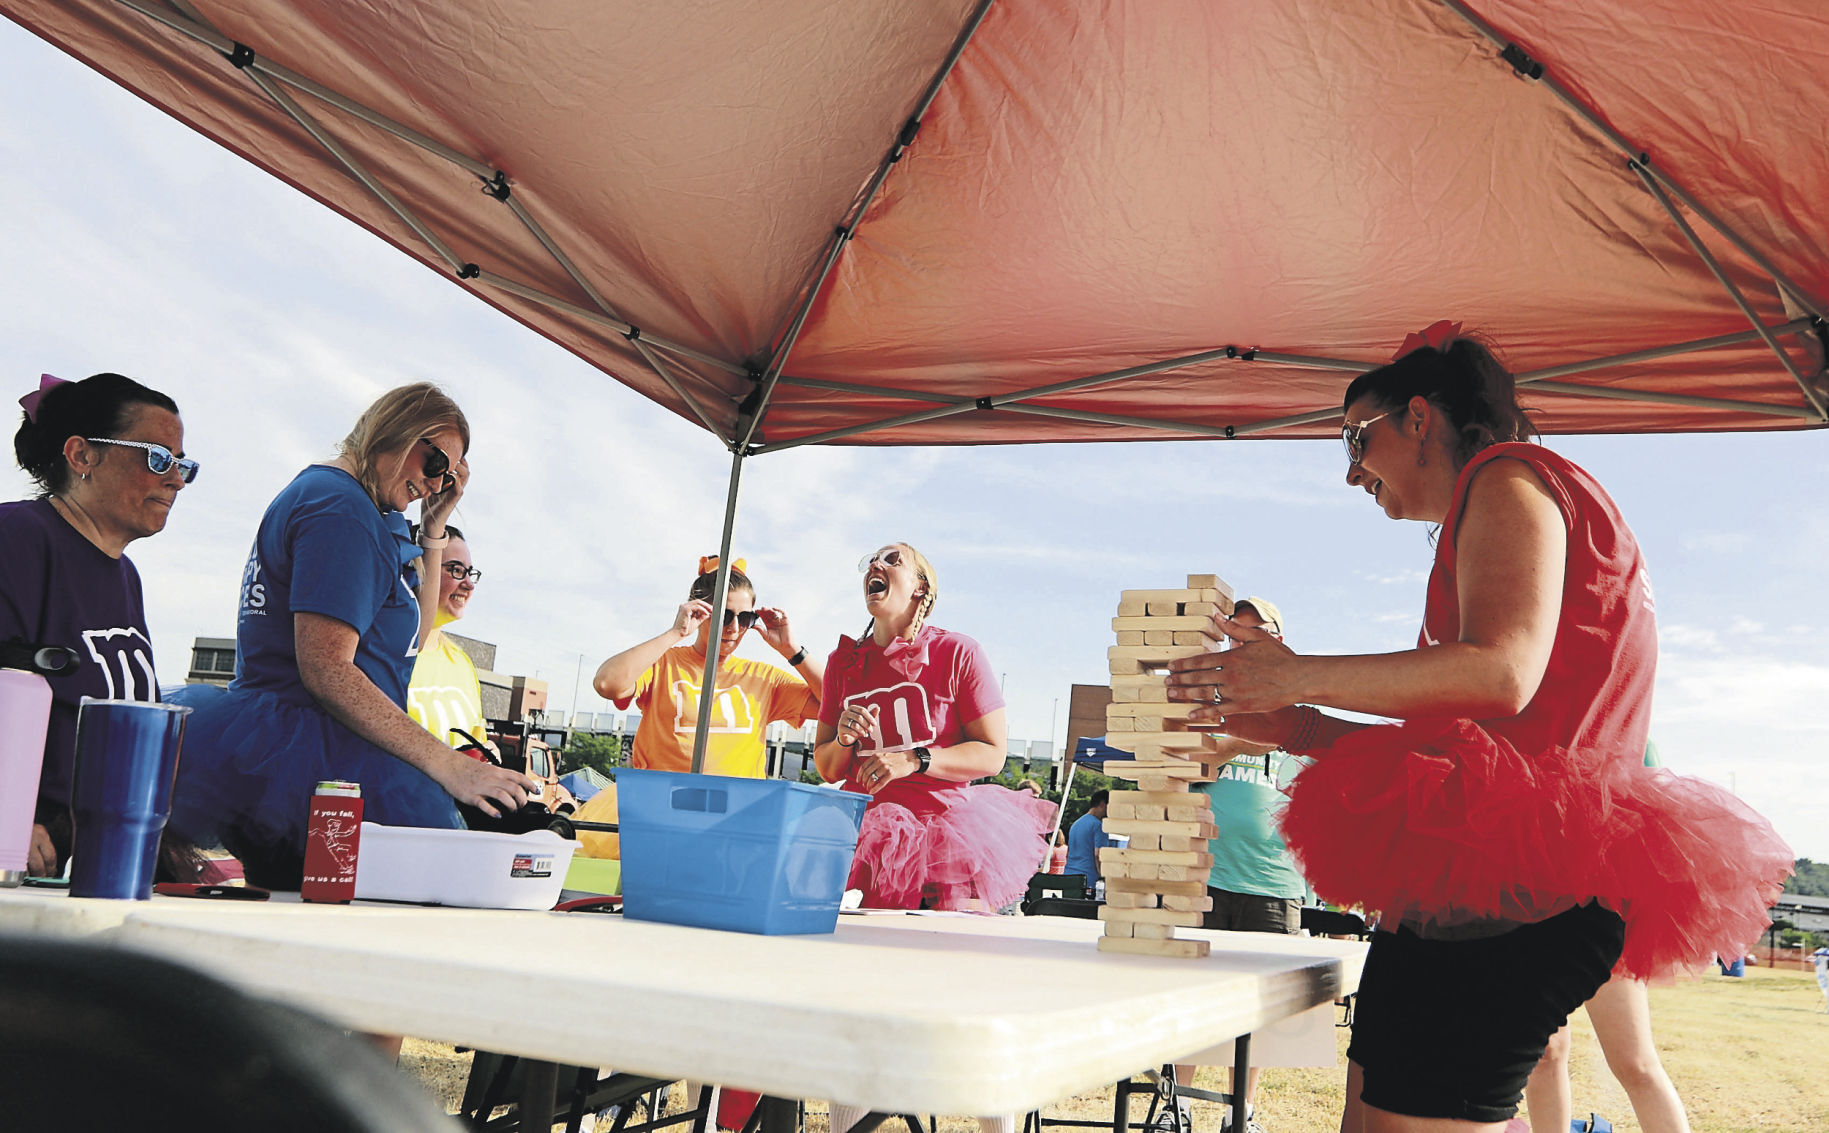 Sarah Adams (right) with Unified Therapy Services does Jenga at the Area Residential Care Corporate and Community game night at the Port of Dubuque on Friday, June 11, 2021.    PHOTO CREDIT: Katie Goodale